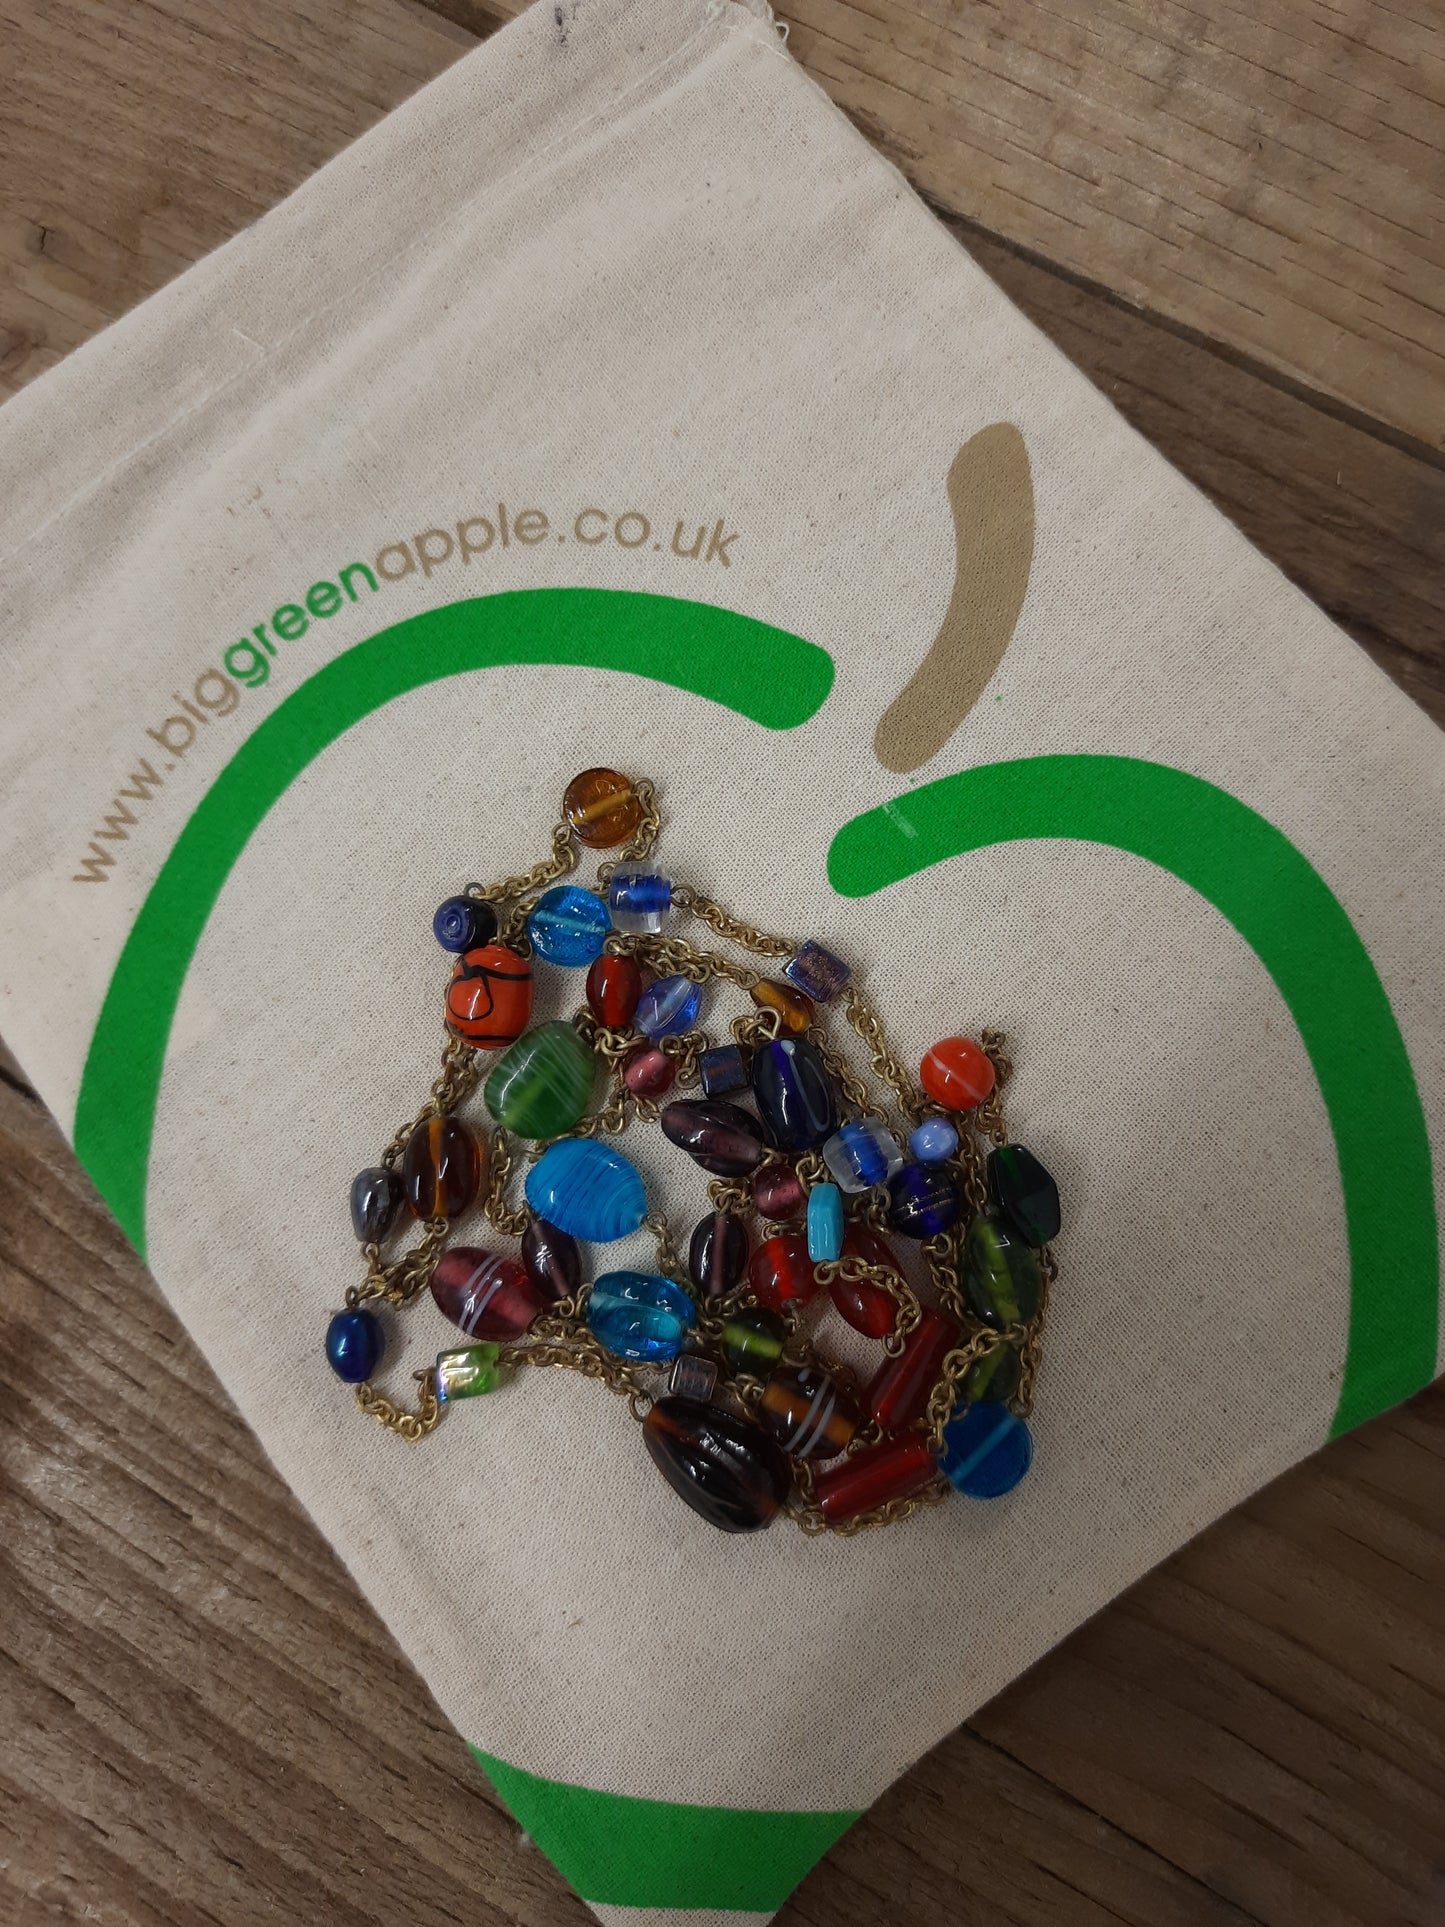 Gift, Fair Trade Necklace, Eco Friendly Items, Sustainable Company,  Shop Ethical, Ethical Jewellery UK, BIG GREEN APPLE 